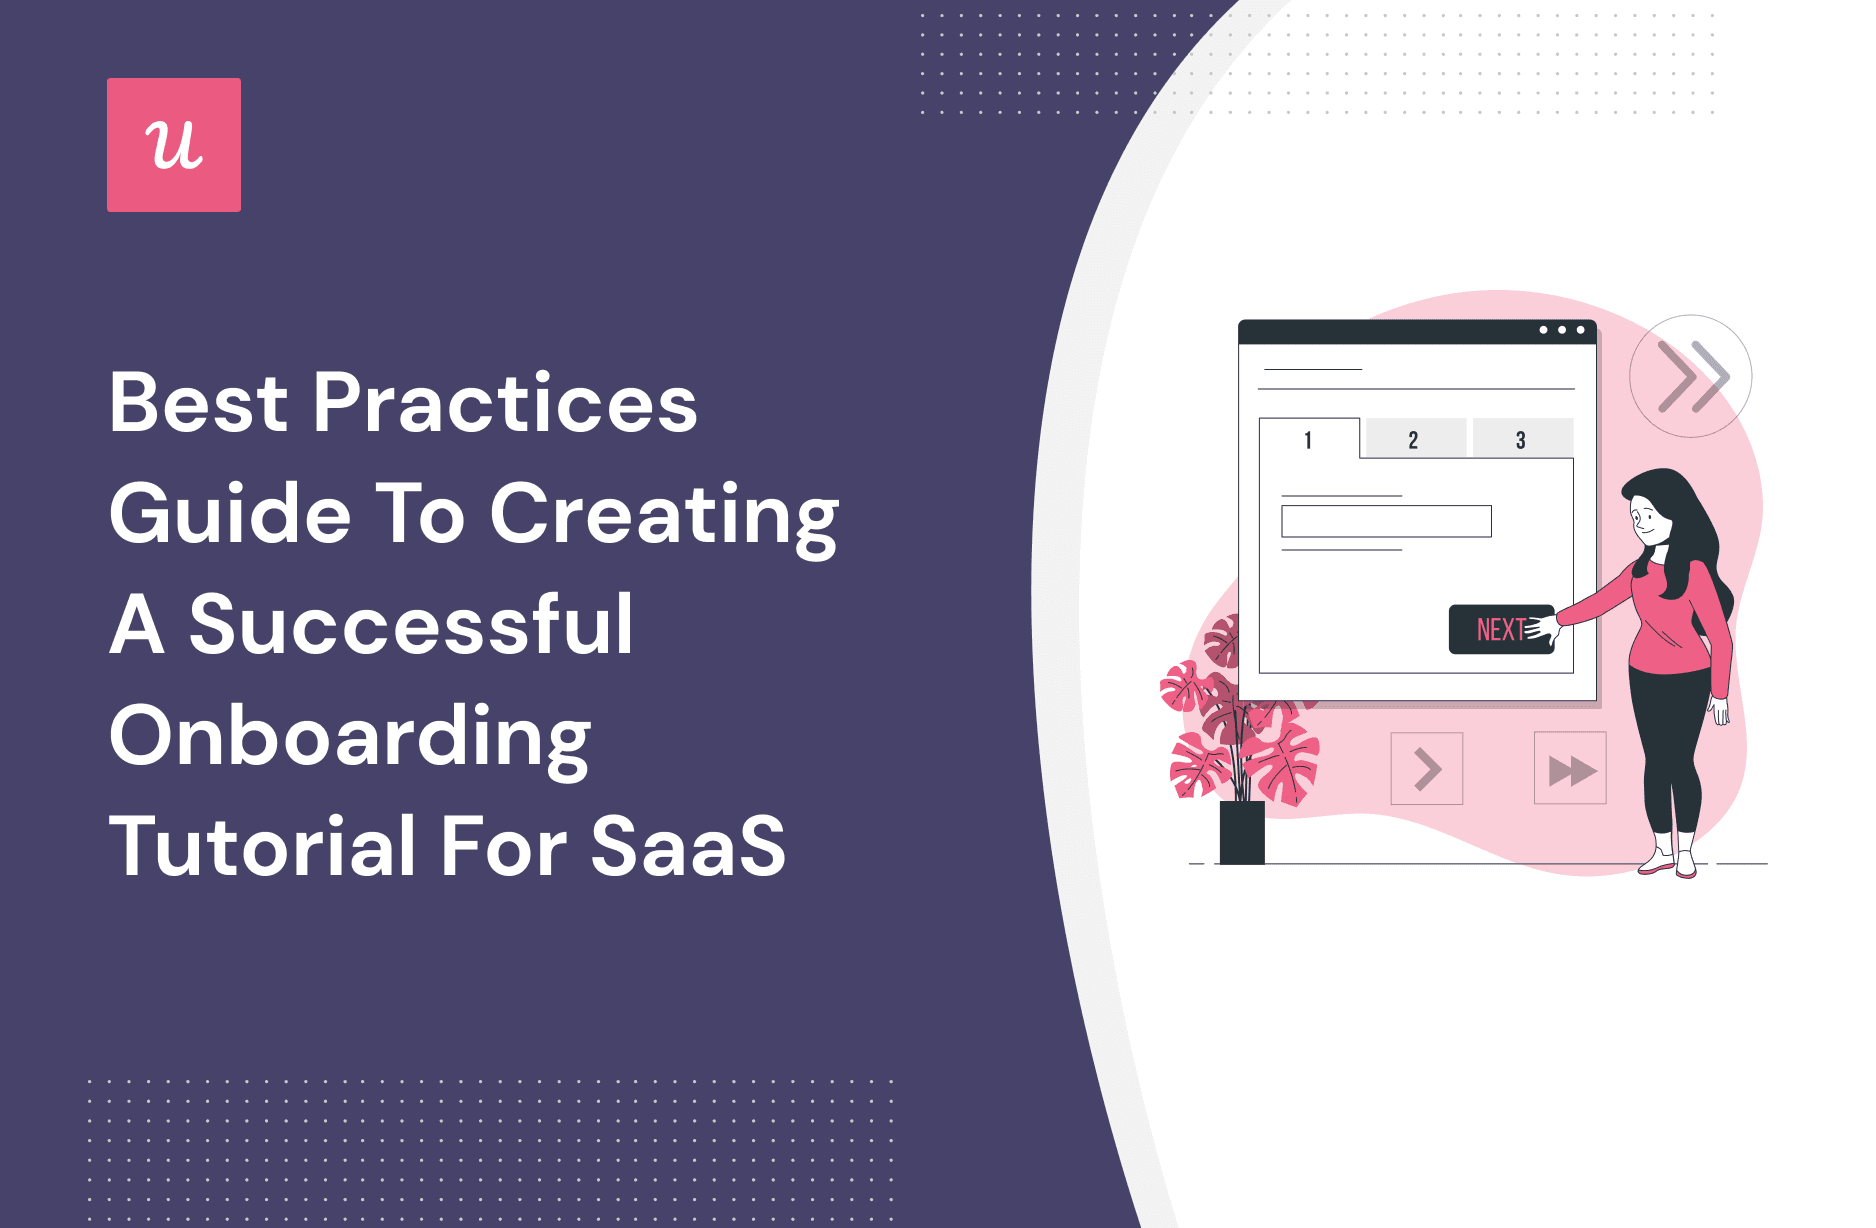 Best Practices Guide to Creating a Successful Onboarding Tutorial for SaaS cover